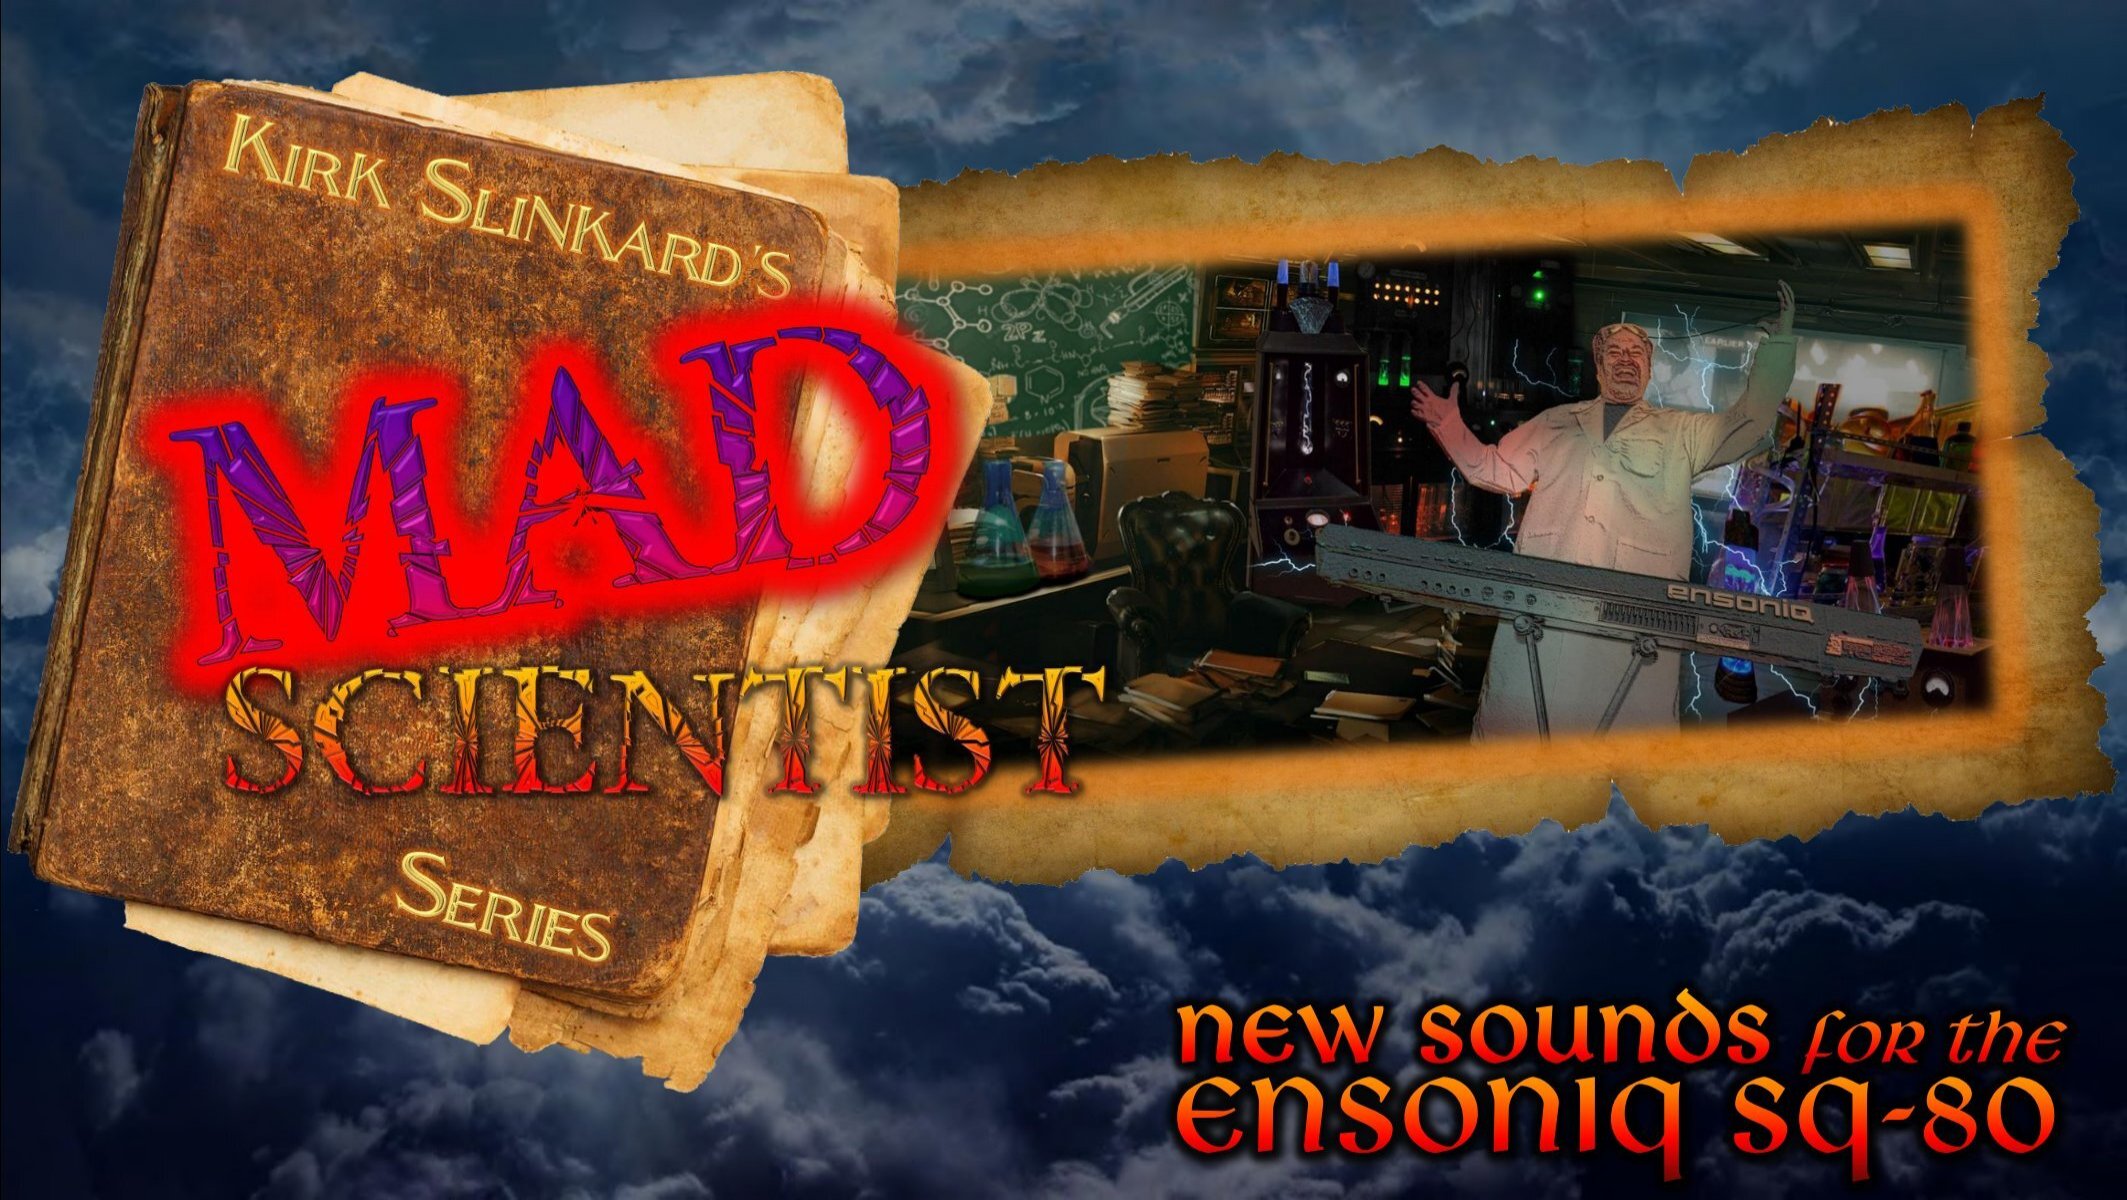 Kirk Slinkard's Mad Scientist Series - New Sounds for the Ensoniq SQ-80  Synthesizer - Musician's Manual